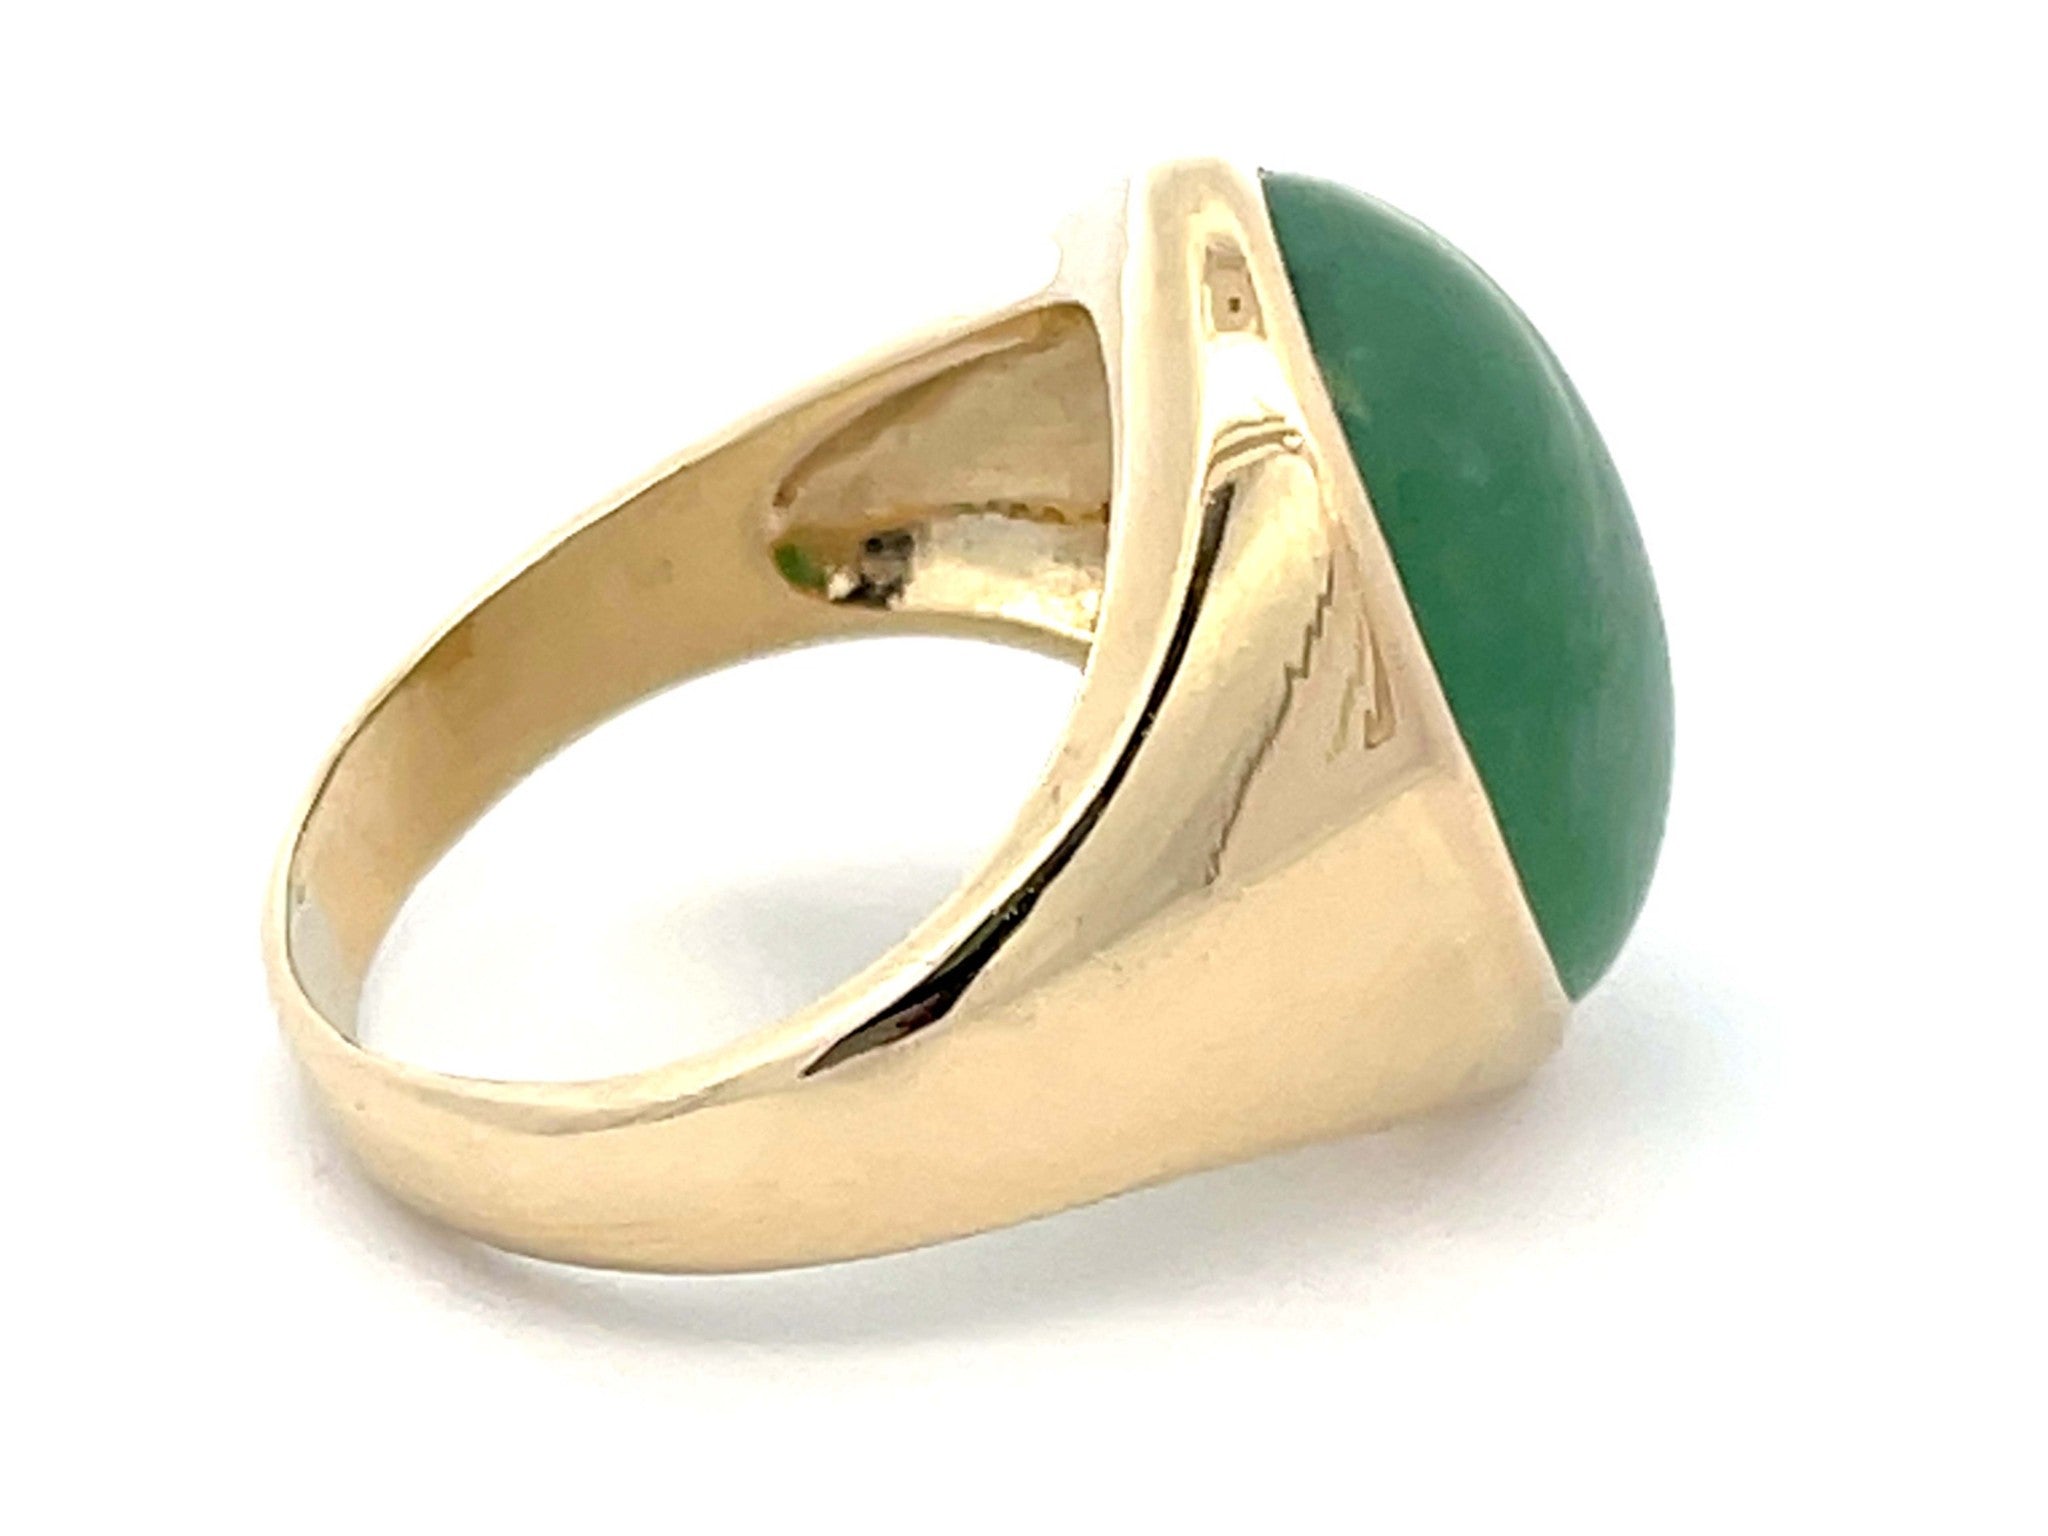 21 Carat Oval Cabochon Green Jade Ring in 14K Yellow Gold